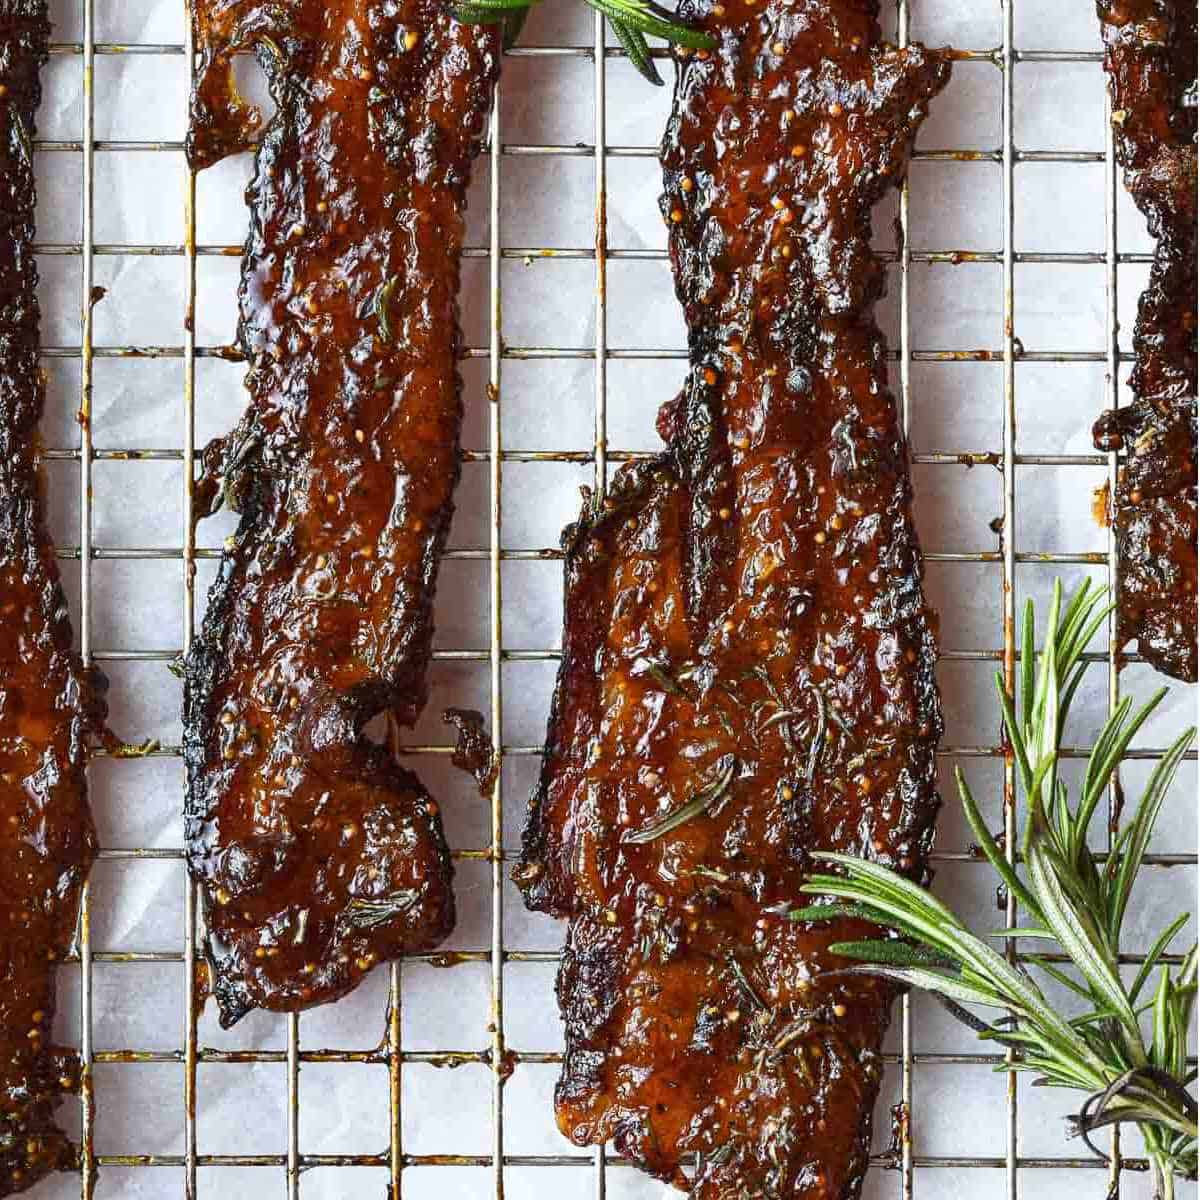 Candied bacon with rosemary.